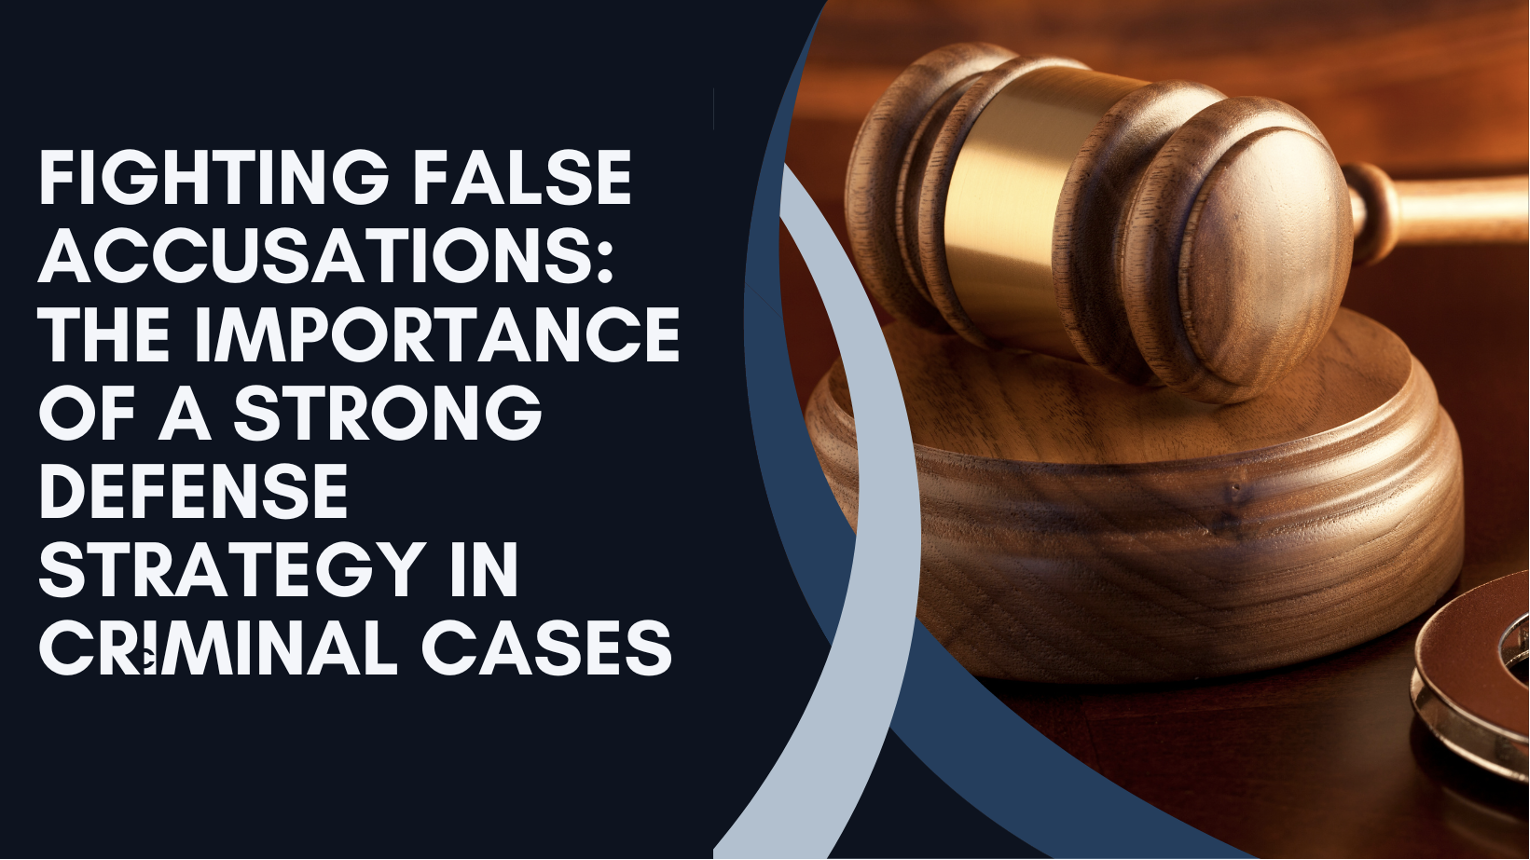 Fighting False Accusations: The Importance of a Strong Defense Strategy in Criminal Cases